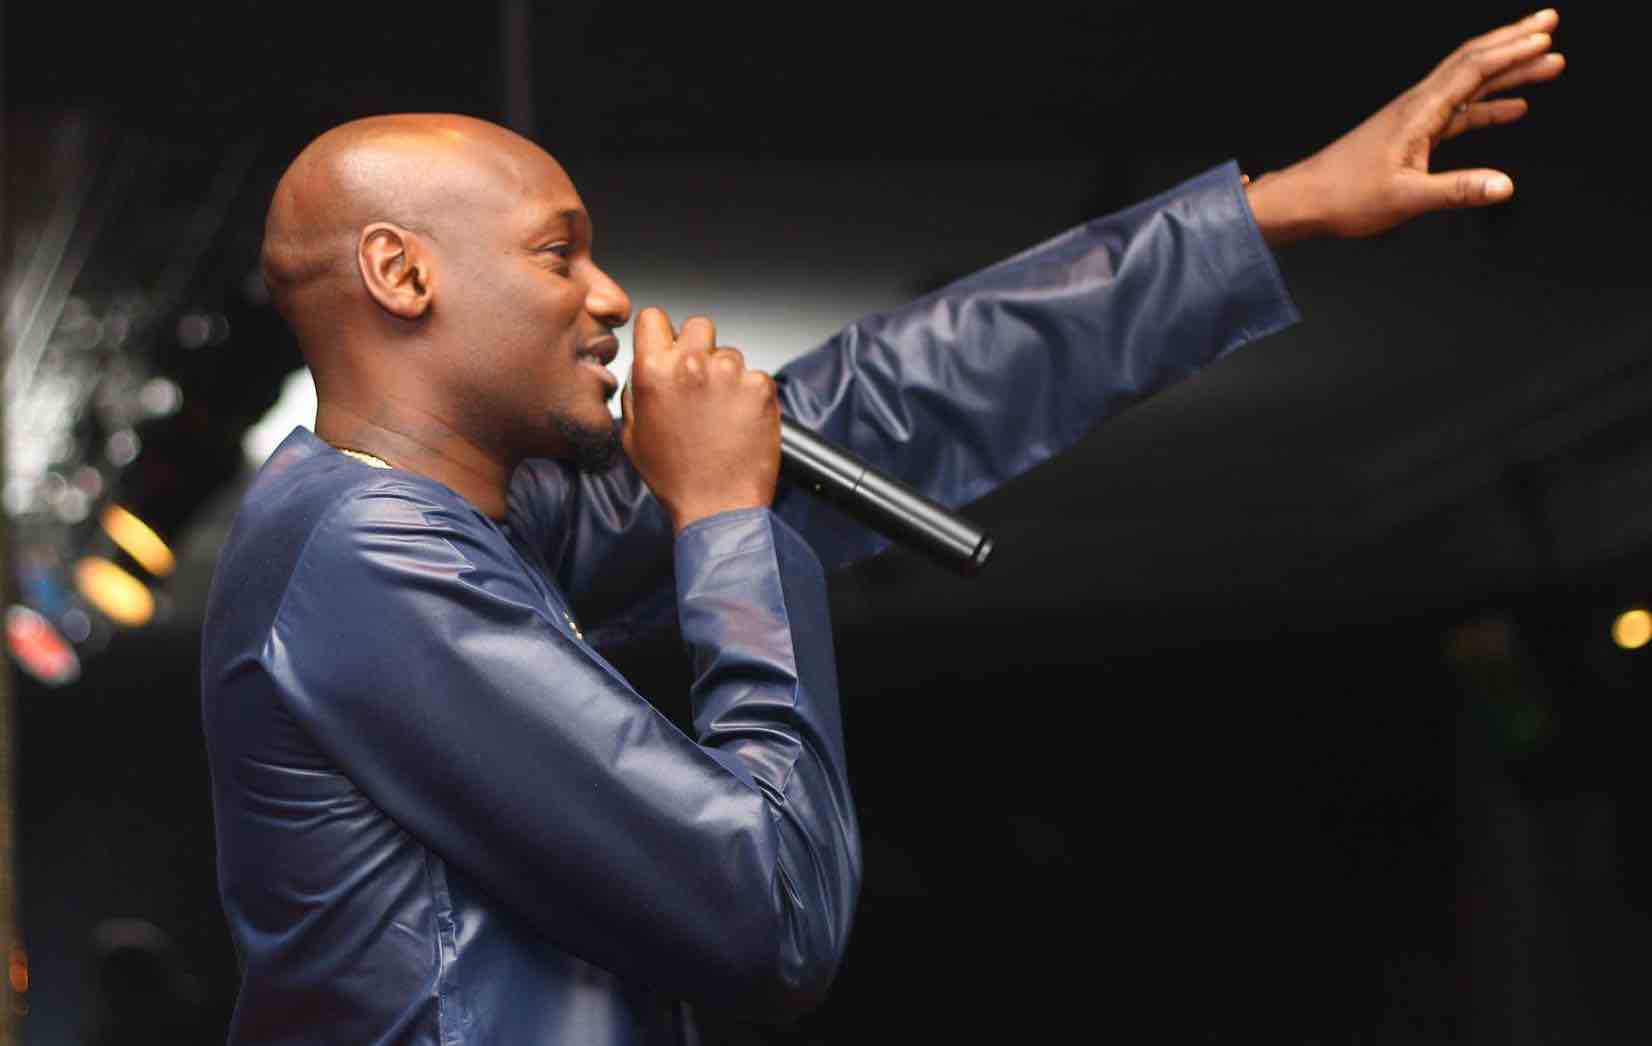 download 2face songs